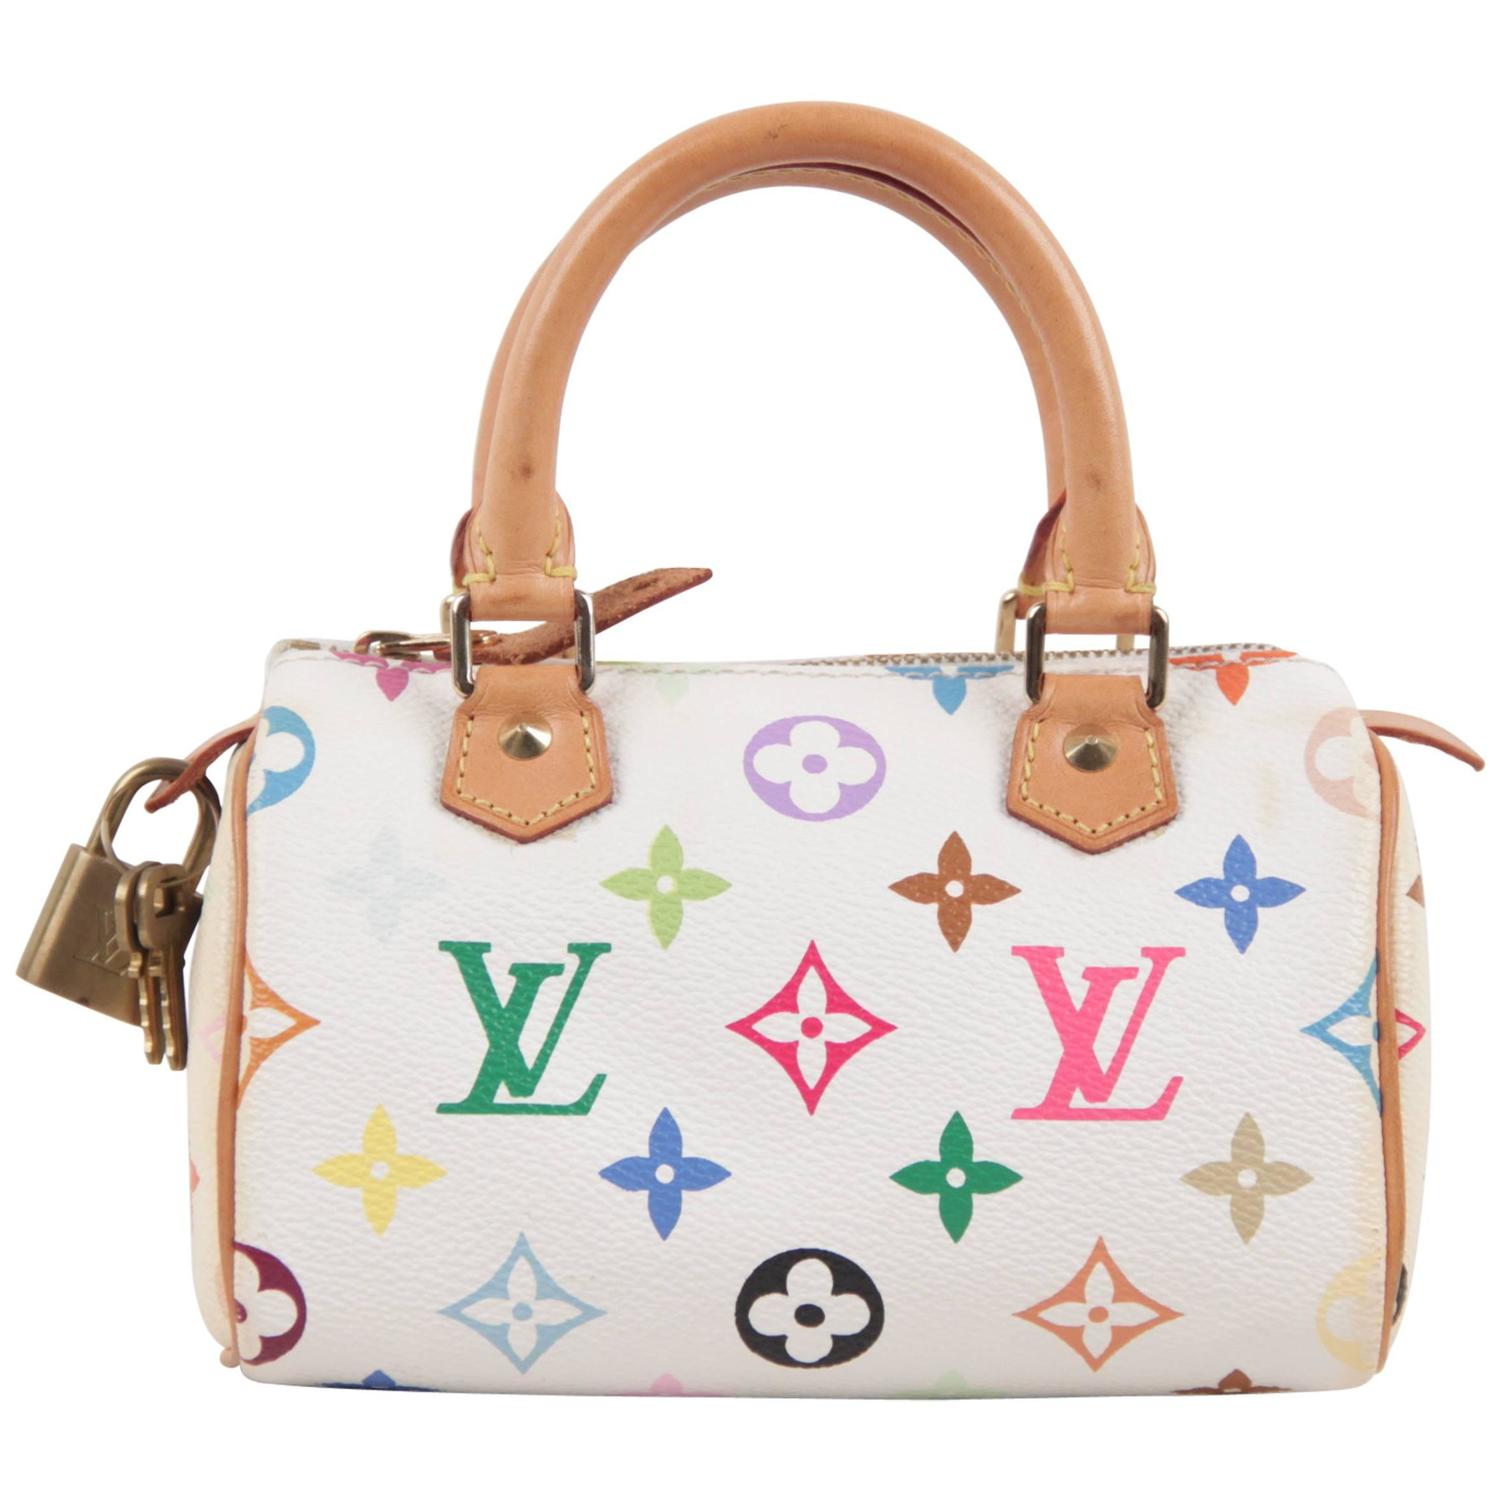 Louis Vuitton Small Bag White | Confederated Tribes of the Umatilla Indian Reservation